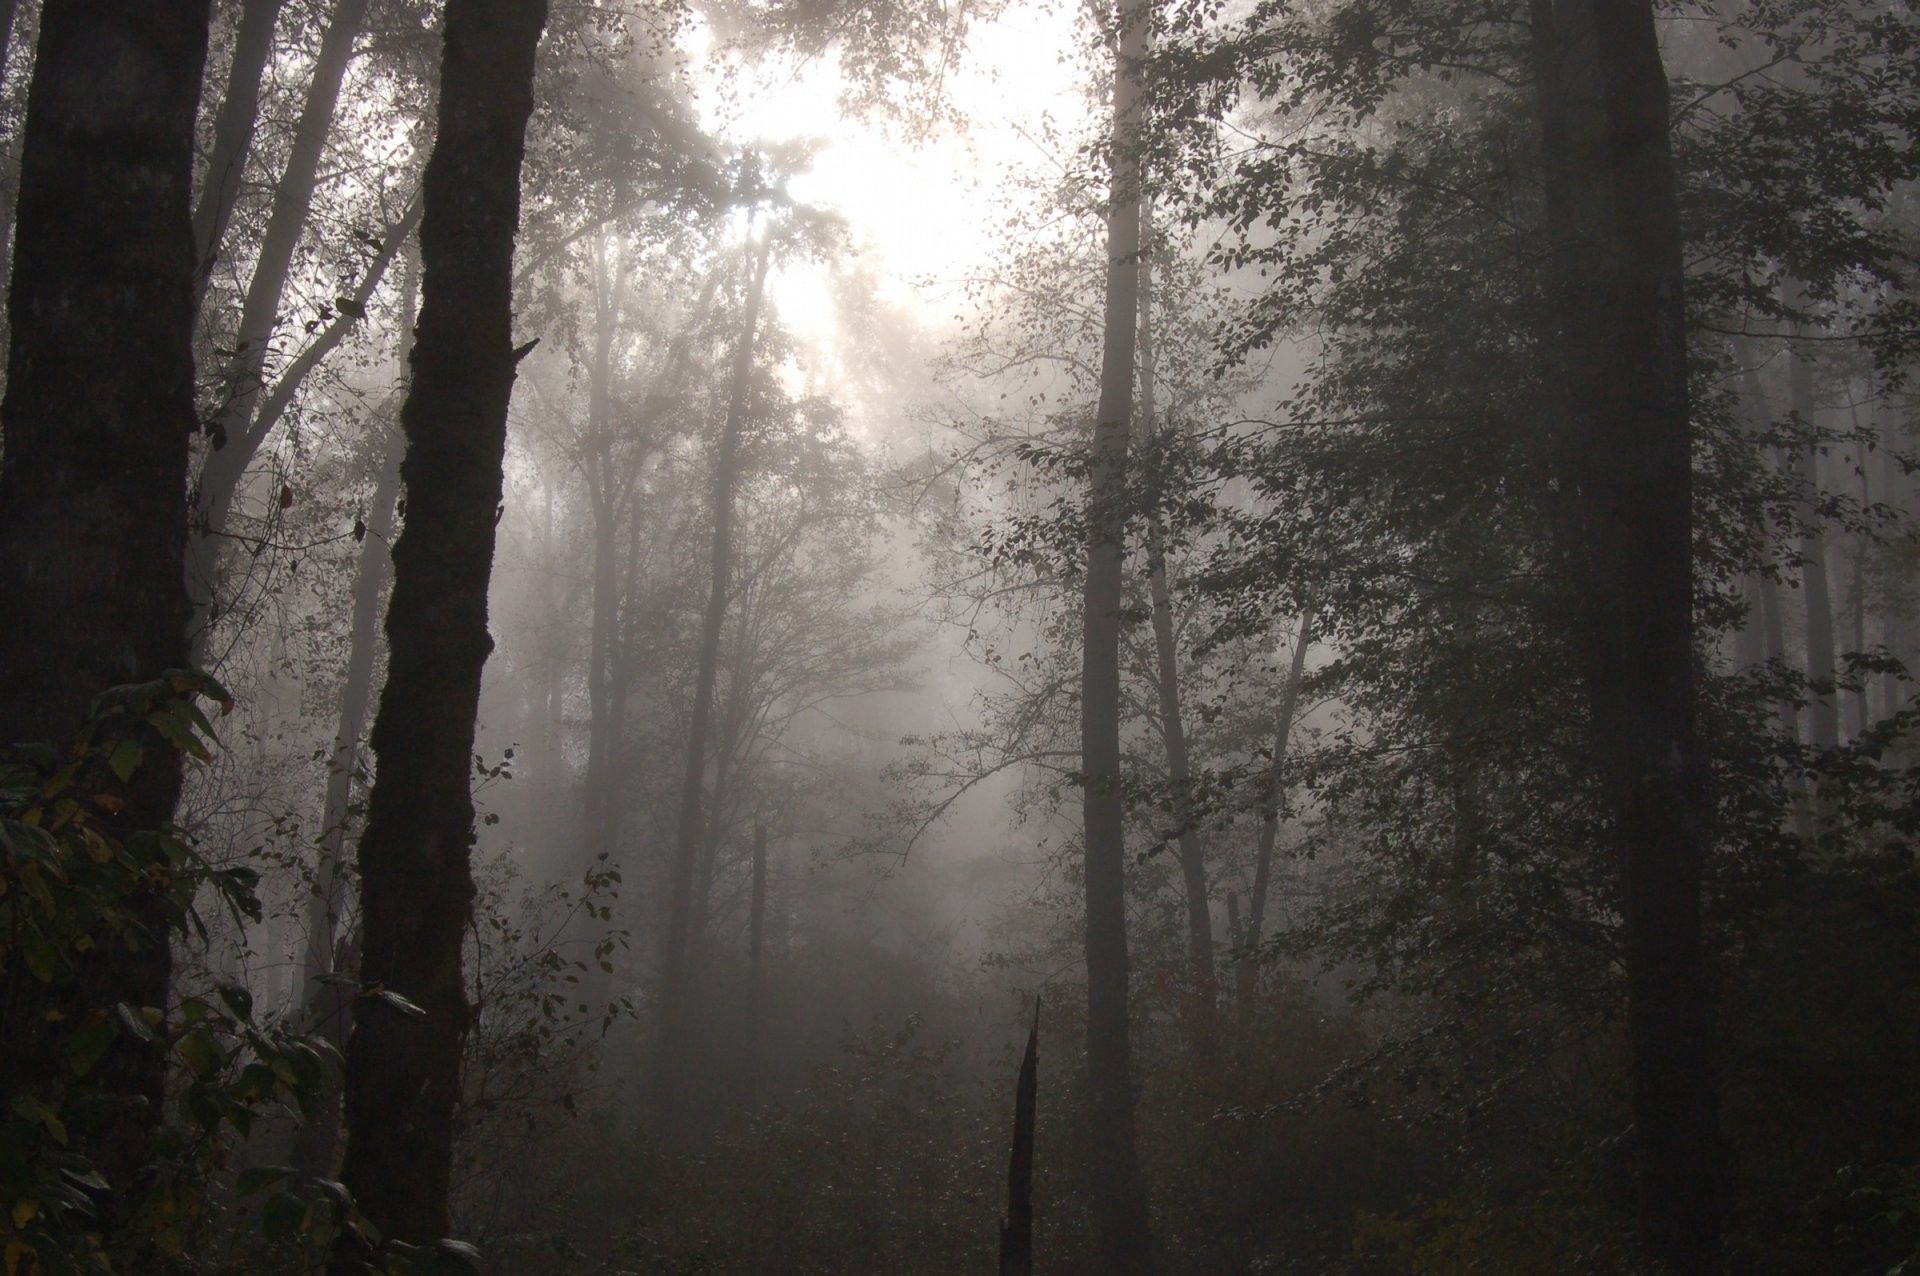 A forest with fog in the background - Fog, foggy forest, woods